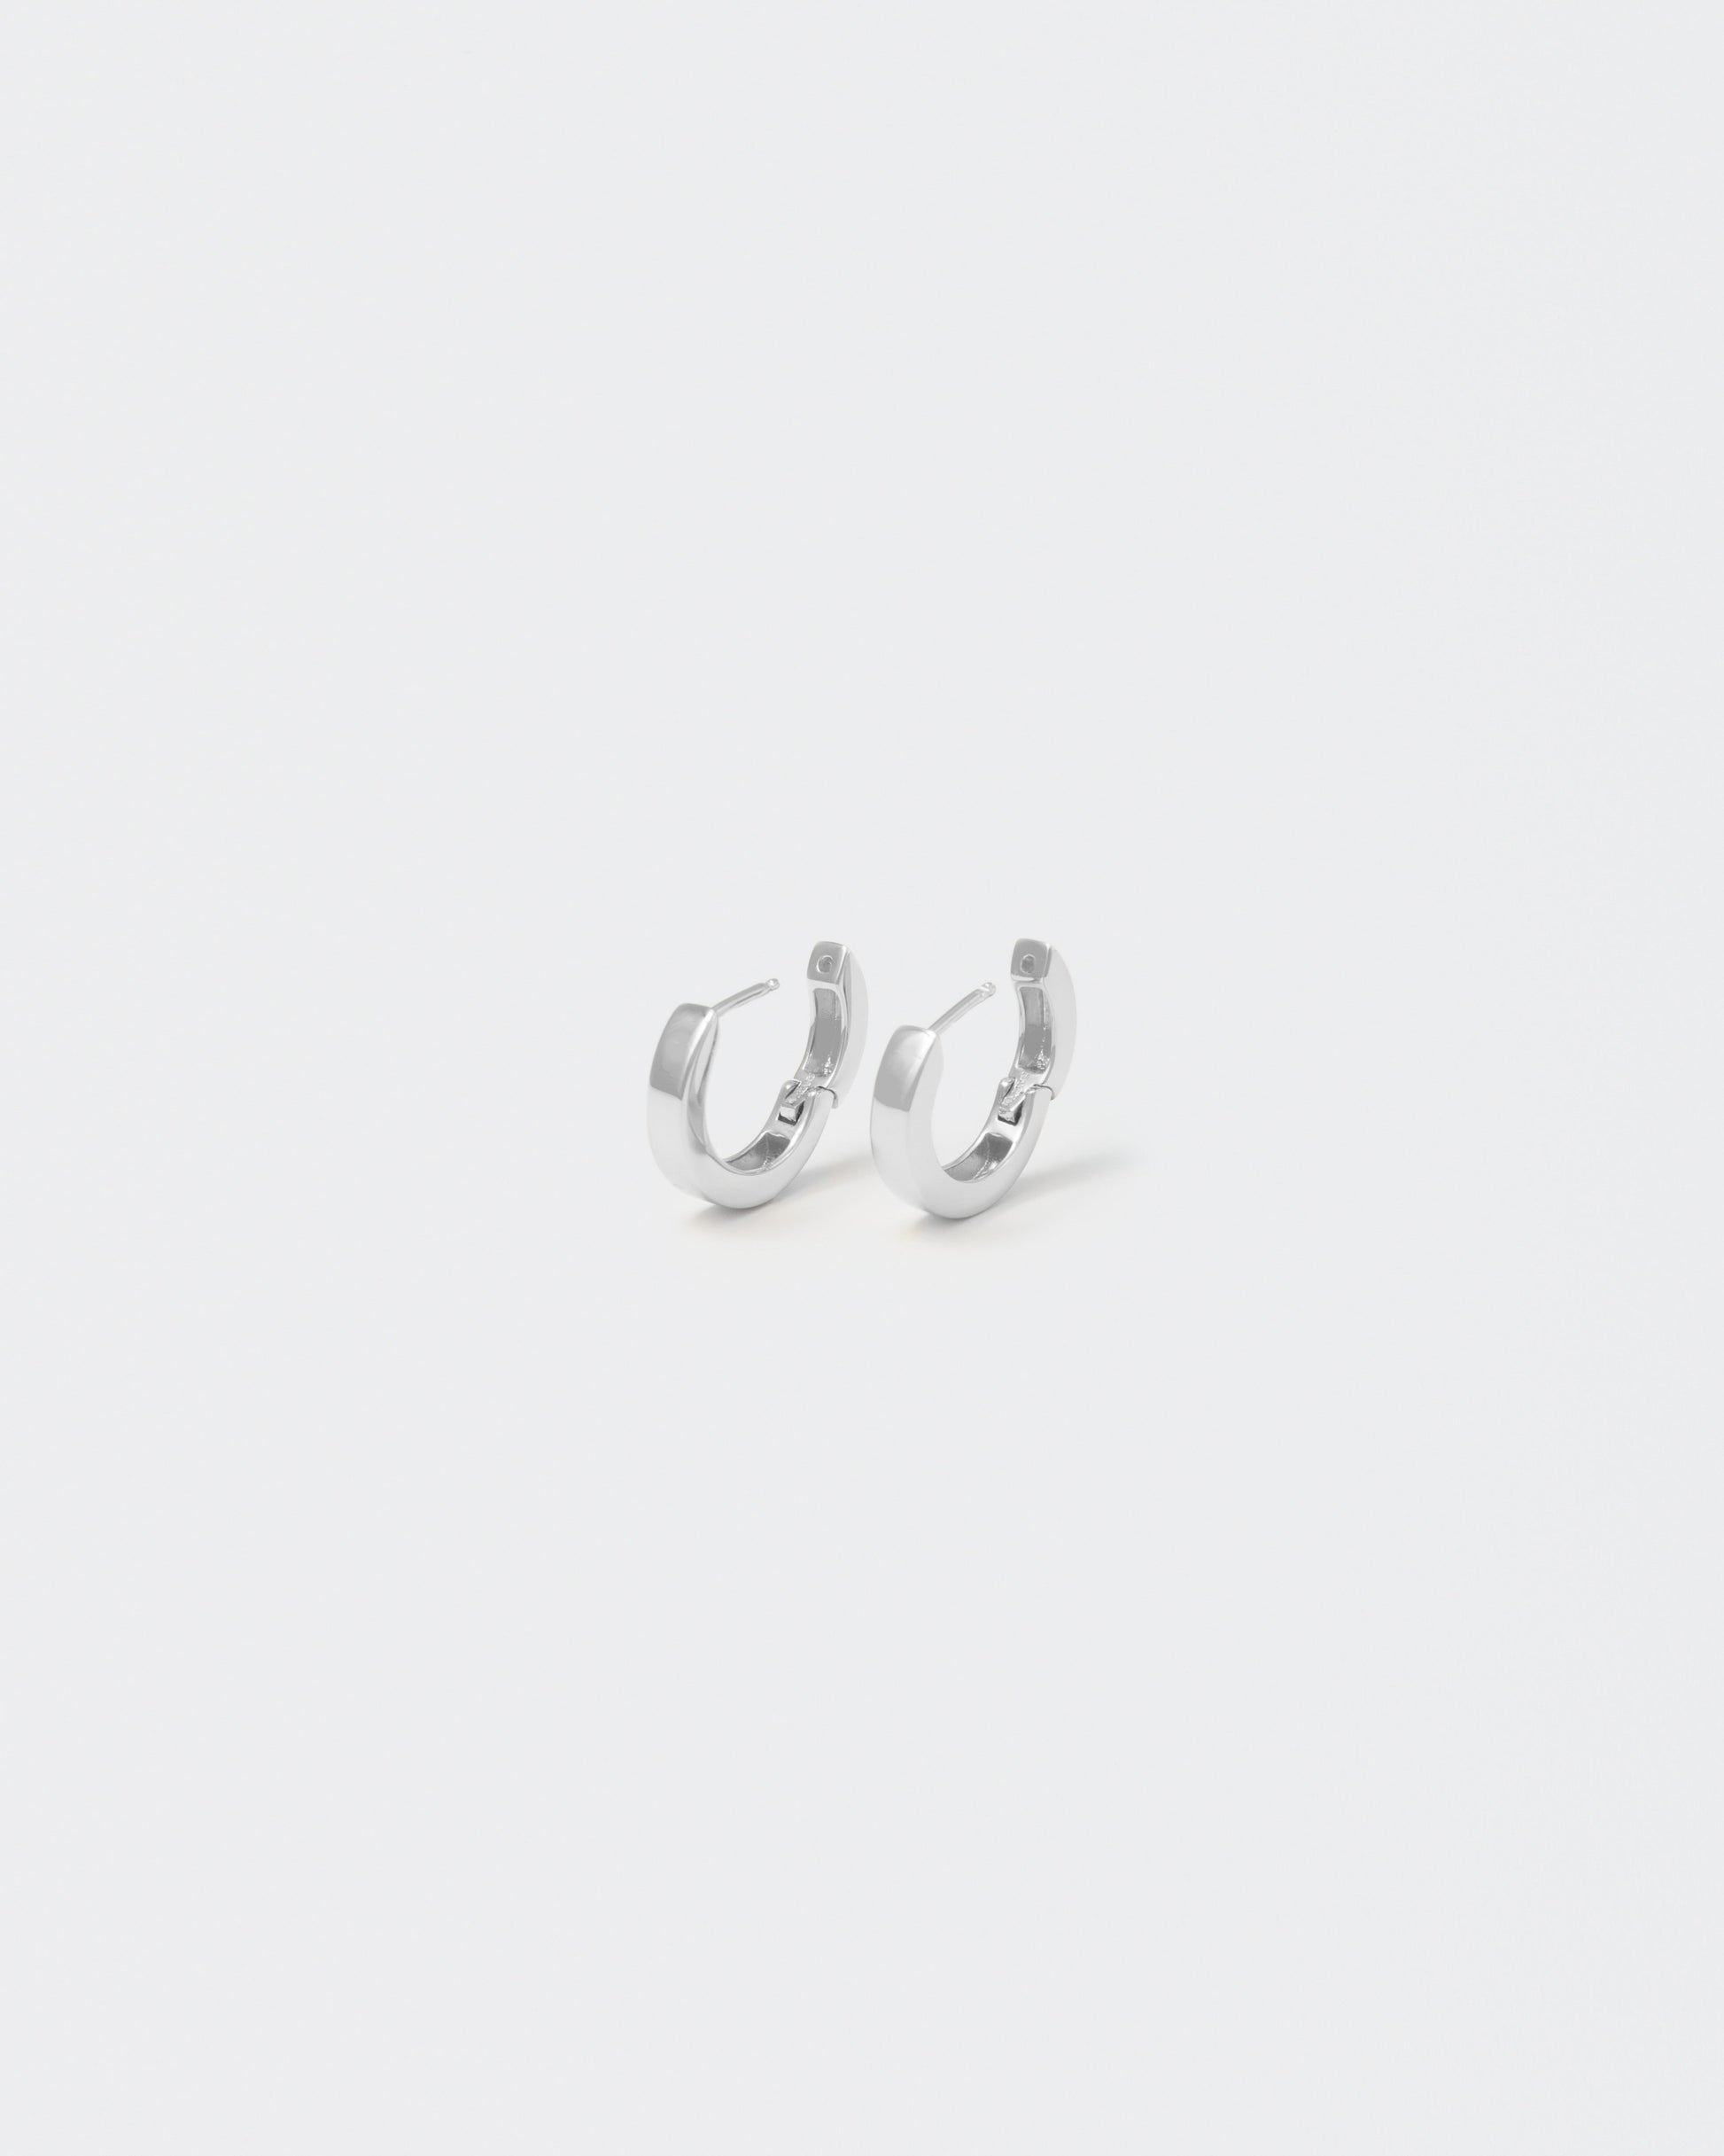 18k white gold coated hoop earrings with lasered logo and details on the inside